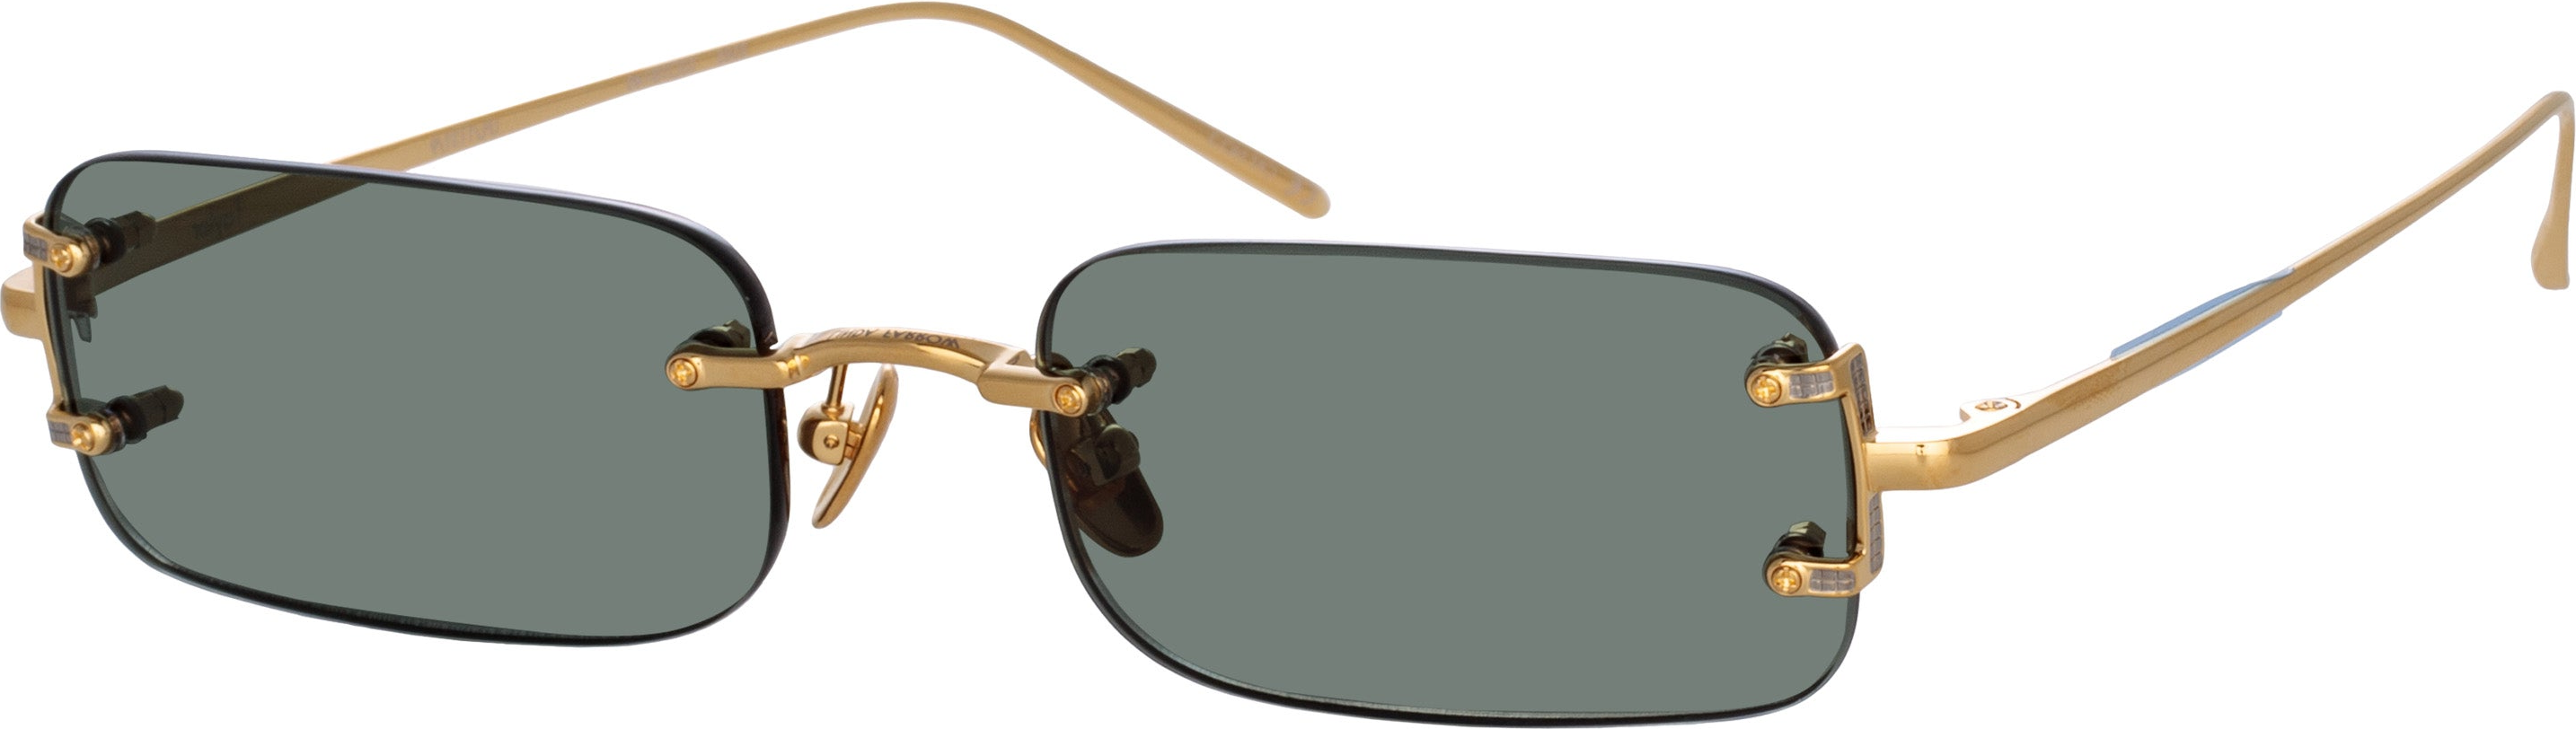 Color_LFL1131C9SUN - Taylor Rectangular Sunglasses in Yellow Gold and Green